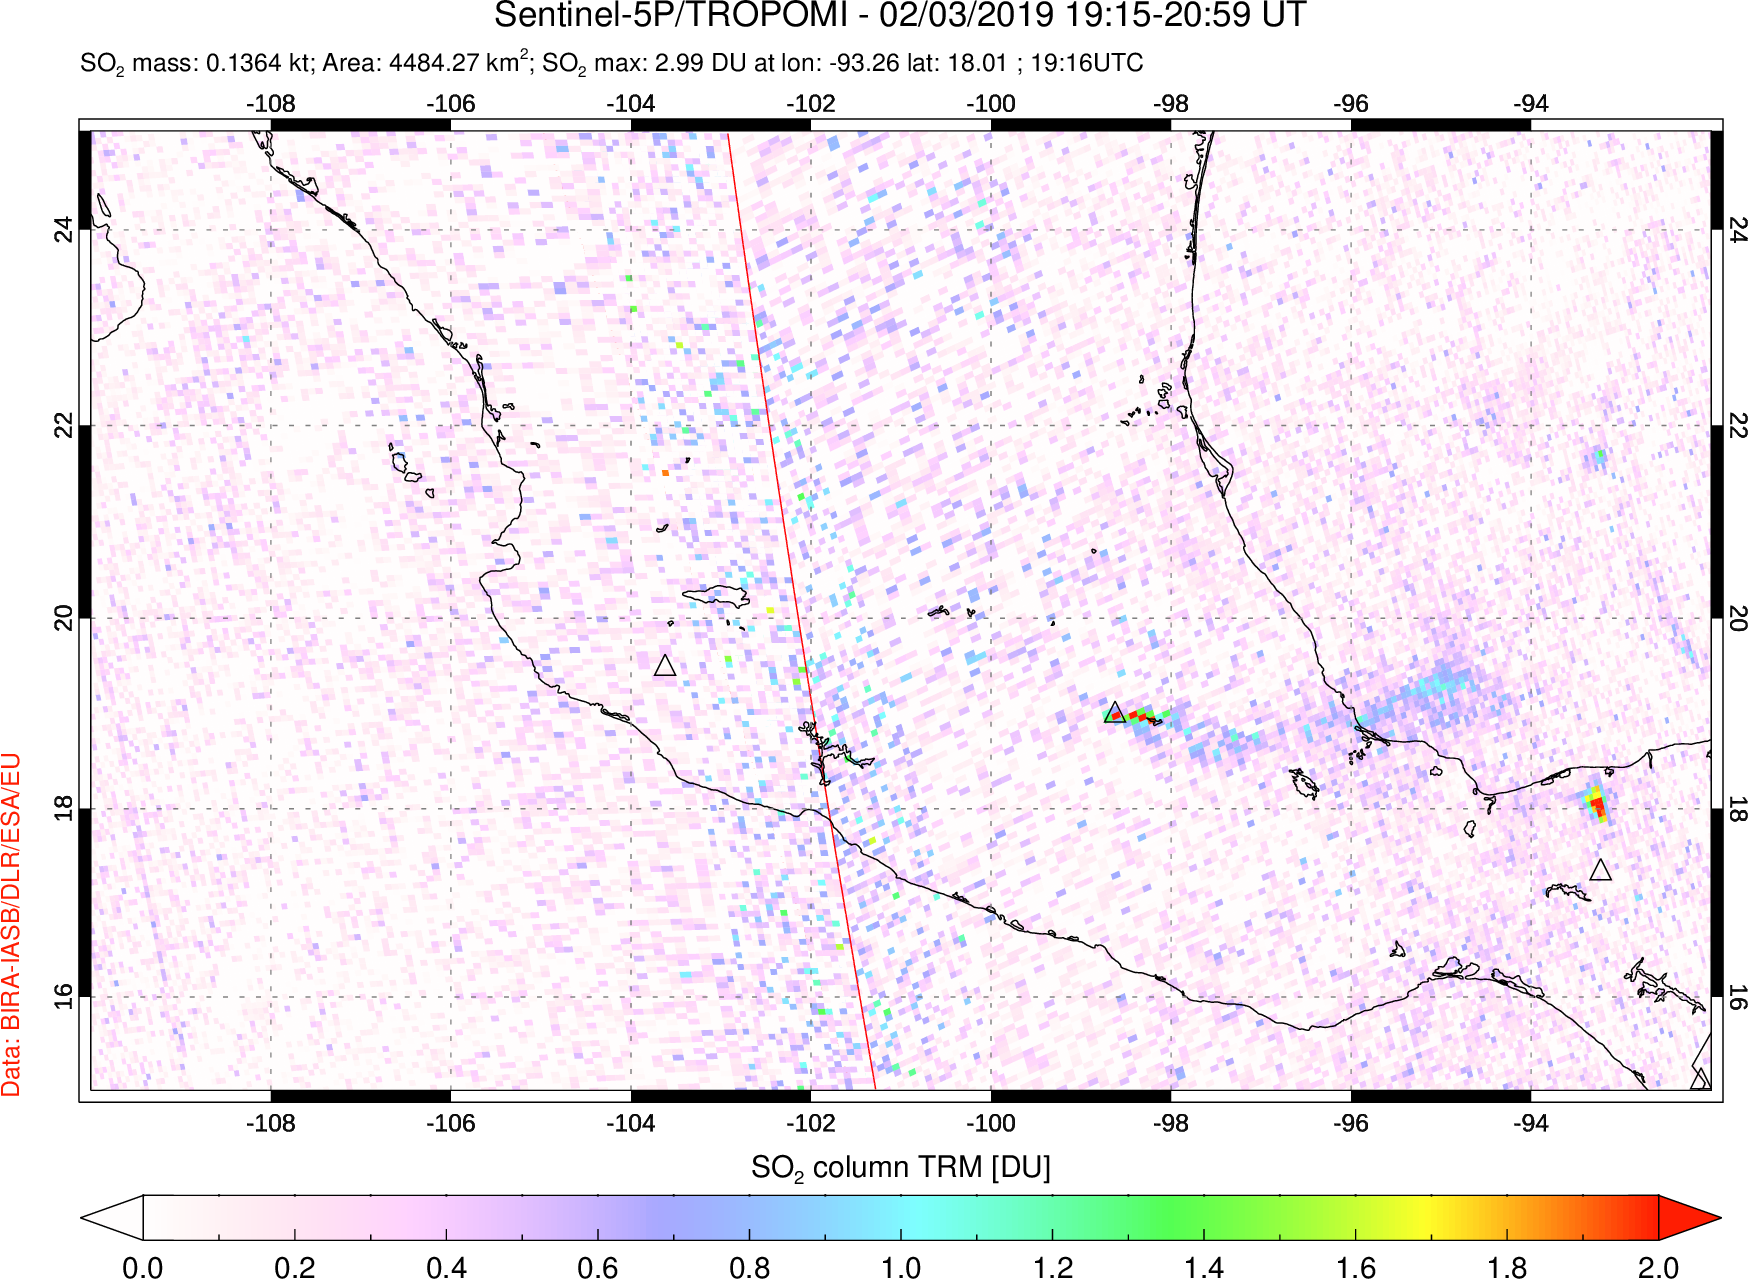 A sulfur dioxide image over Mexico on Feb 03, 2019.